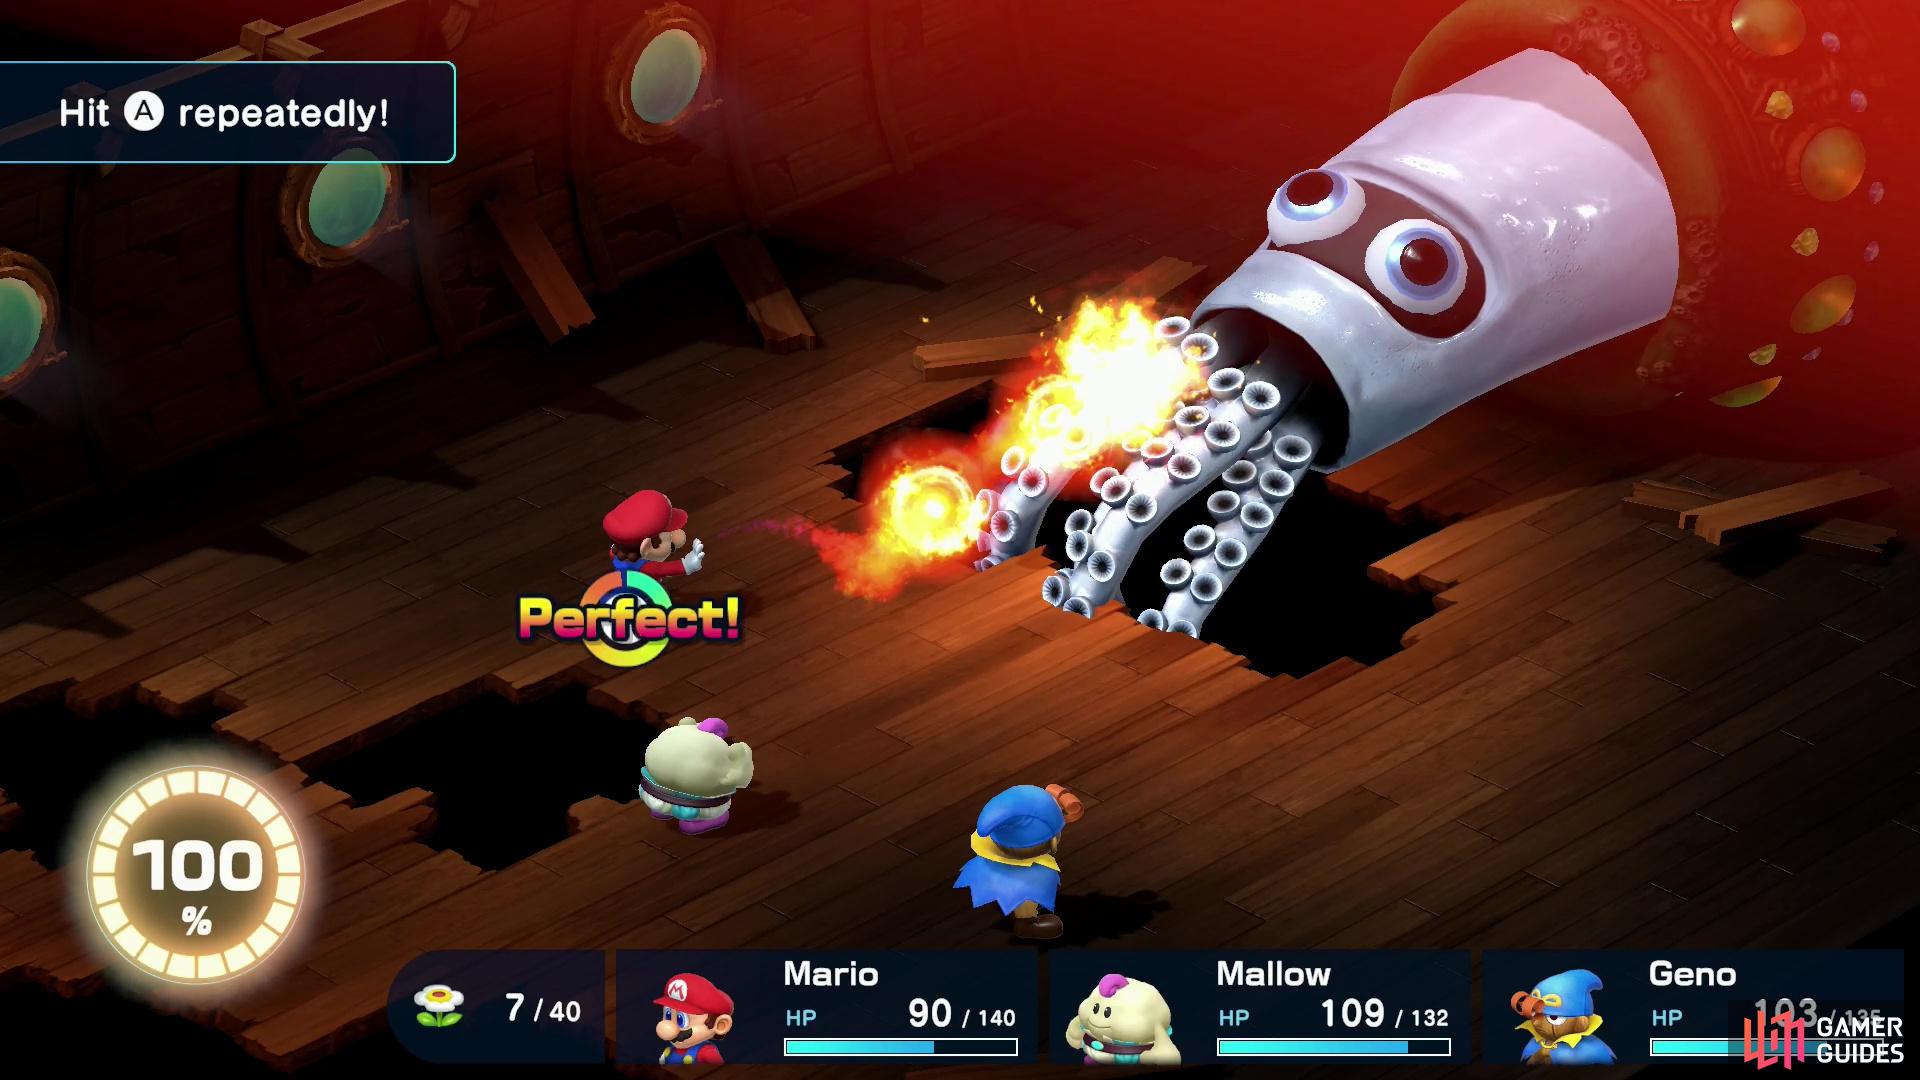 Exploit King Calamari’s weakness to fire with Mario’s Super FIreball attack.